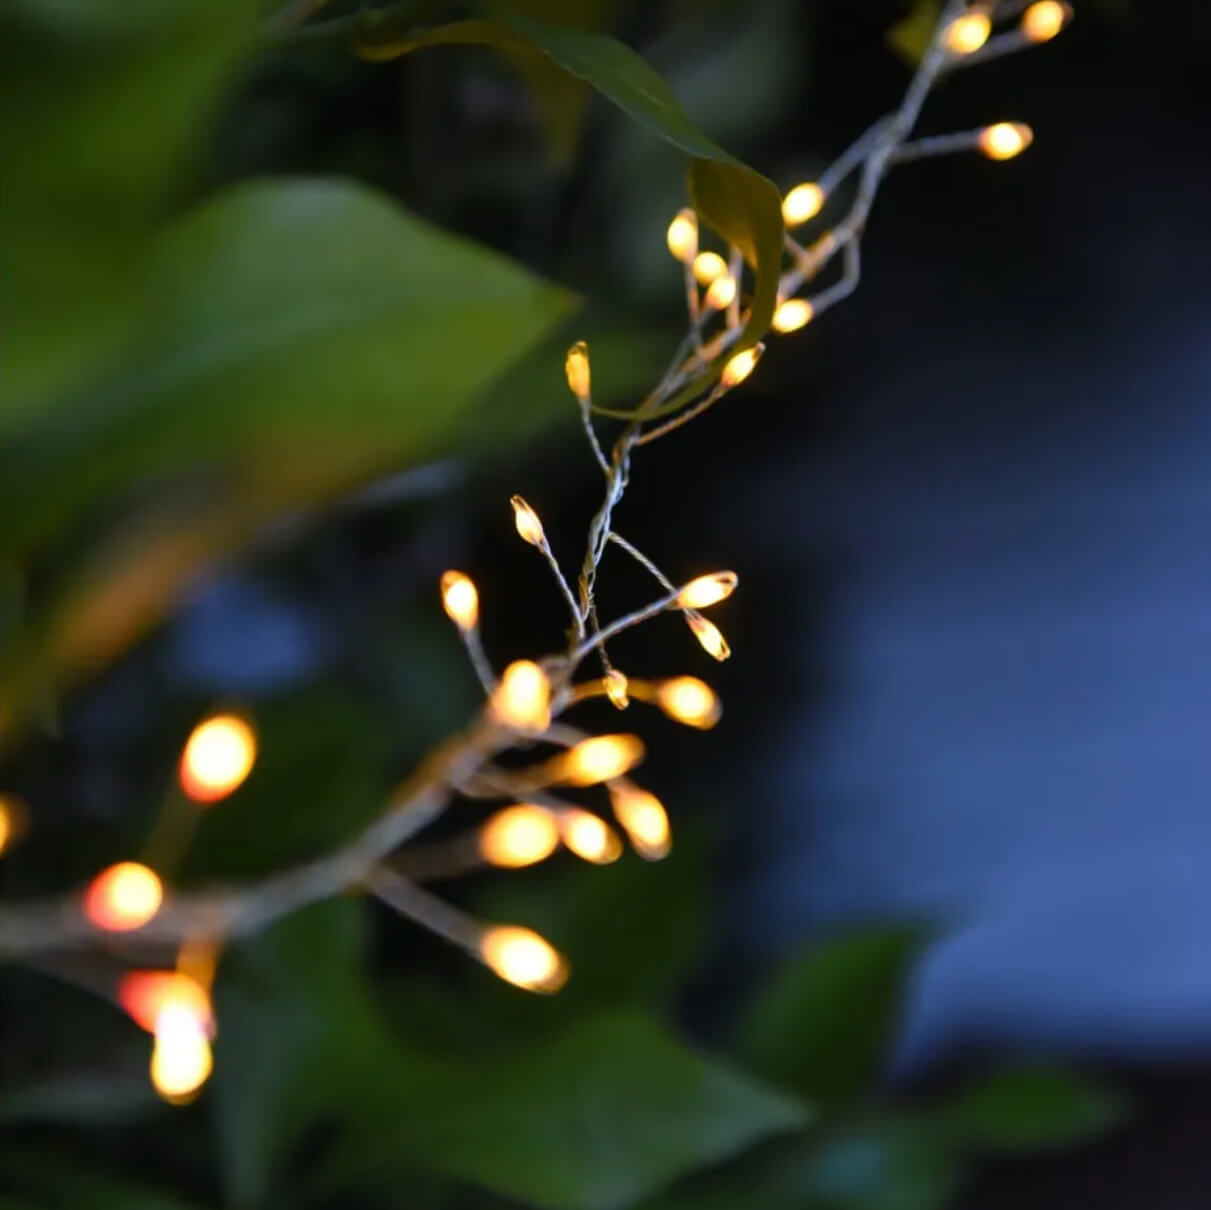 detail of silver cluster led lights lit outdoors within foliage